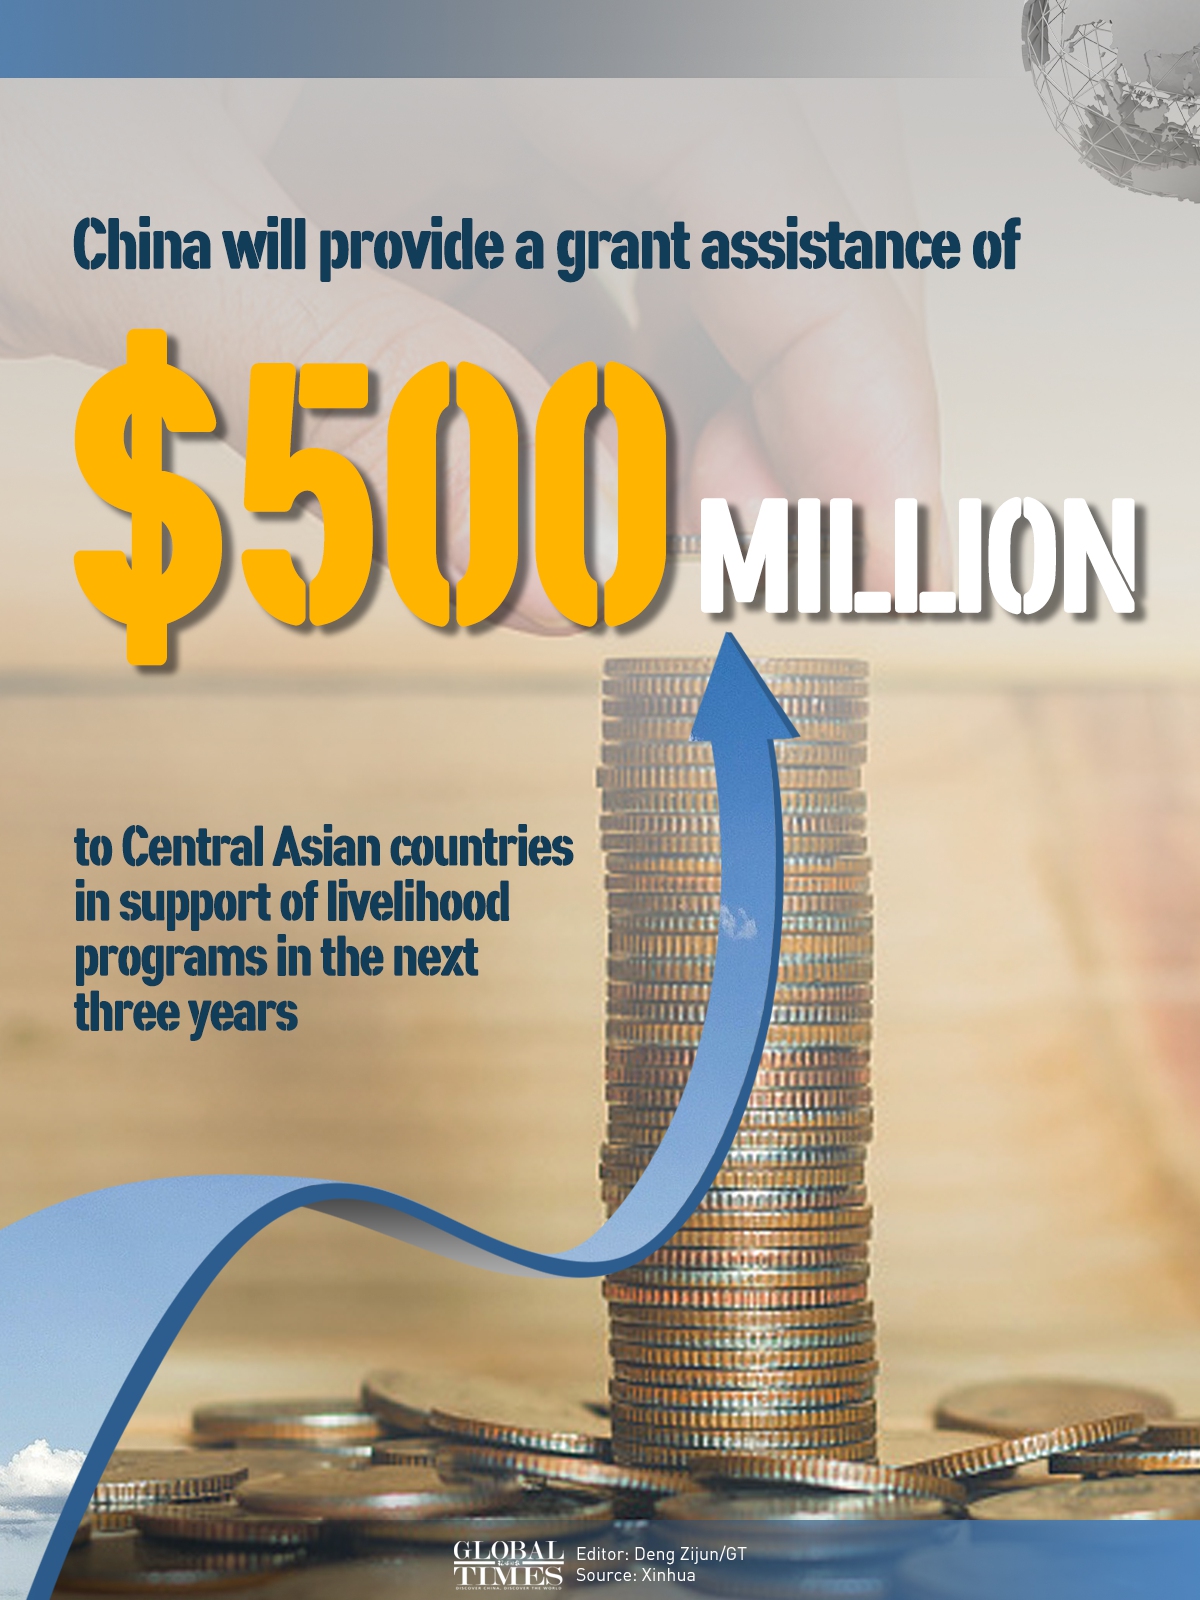 China strives to build an even closer China-Central Asia community Graphic: Deng Zijun/GT